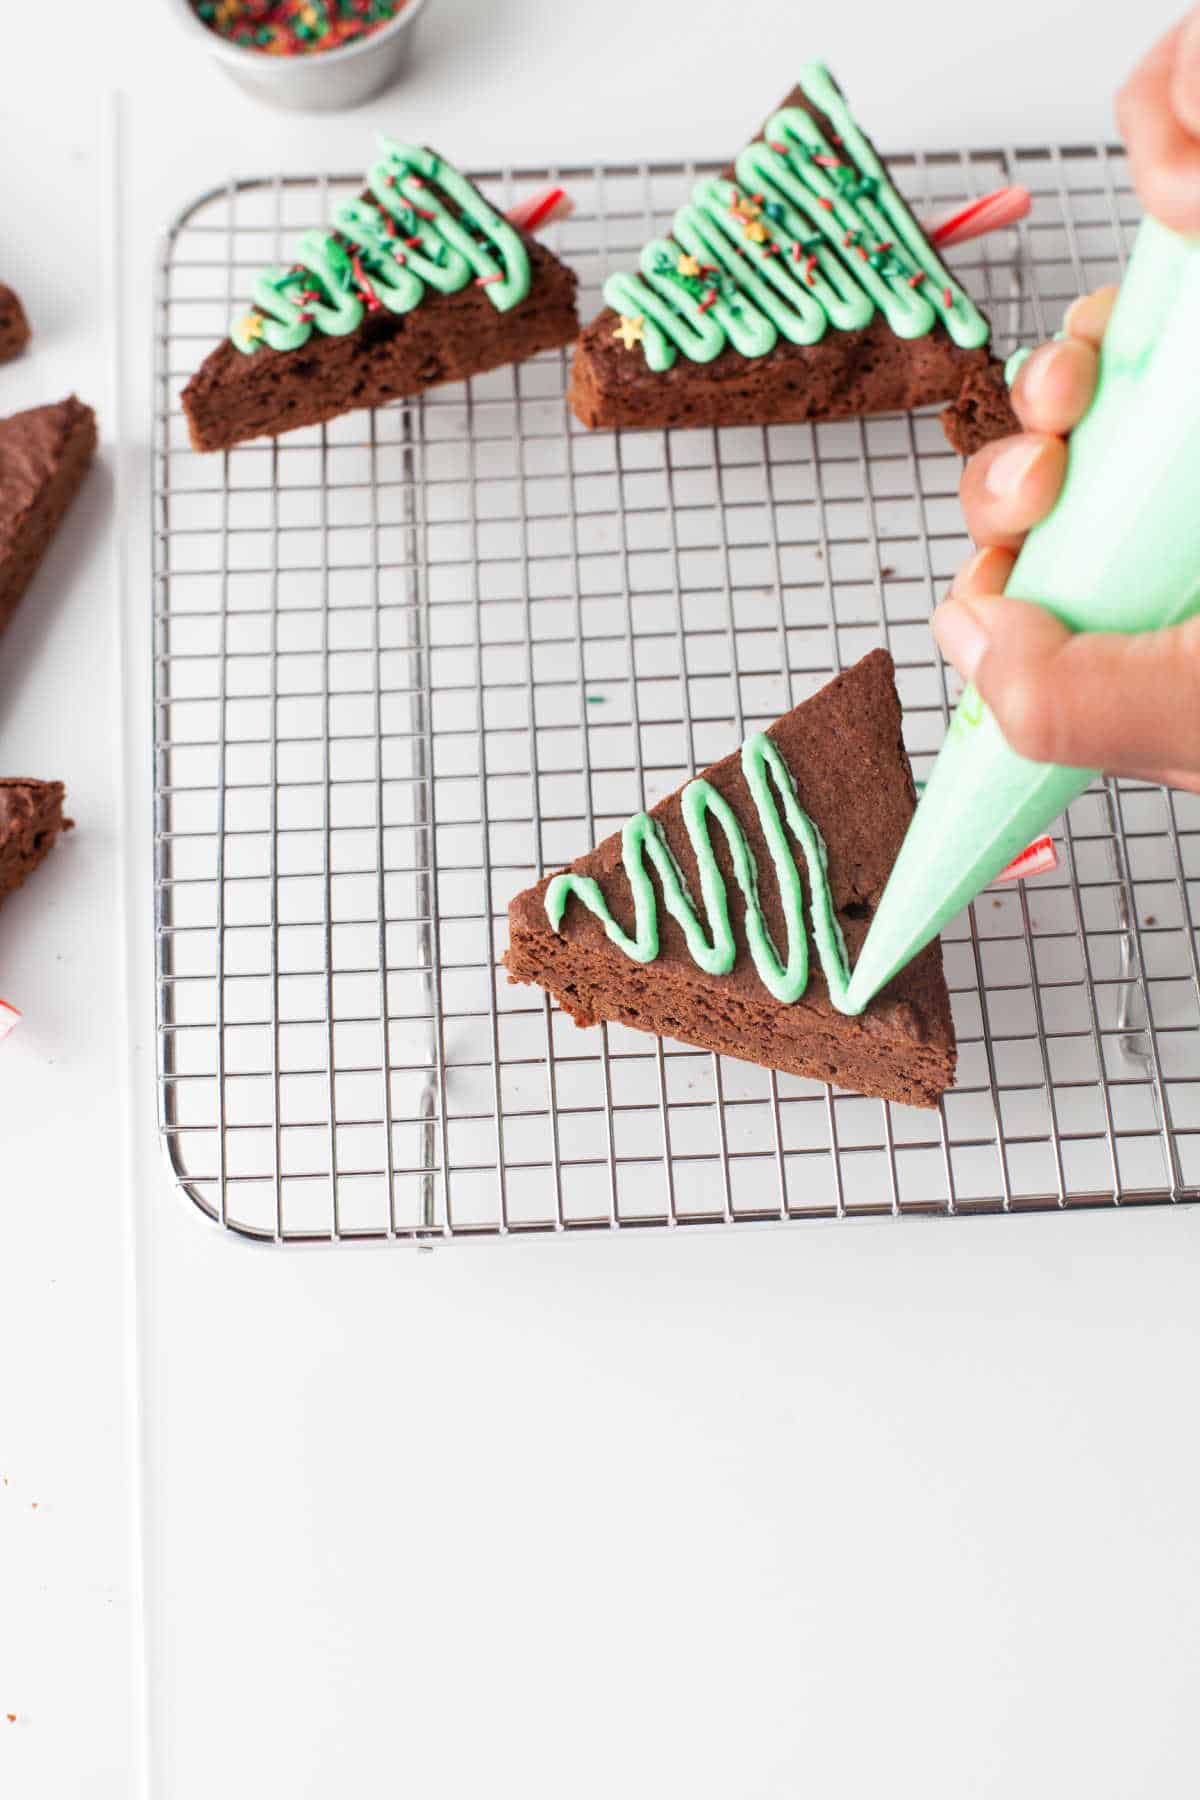 A piping bag piping green frosting onto a brownie triangle. 